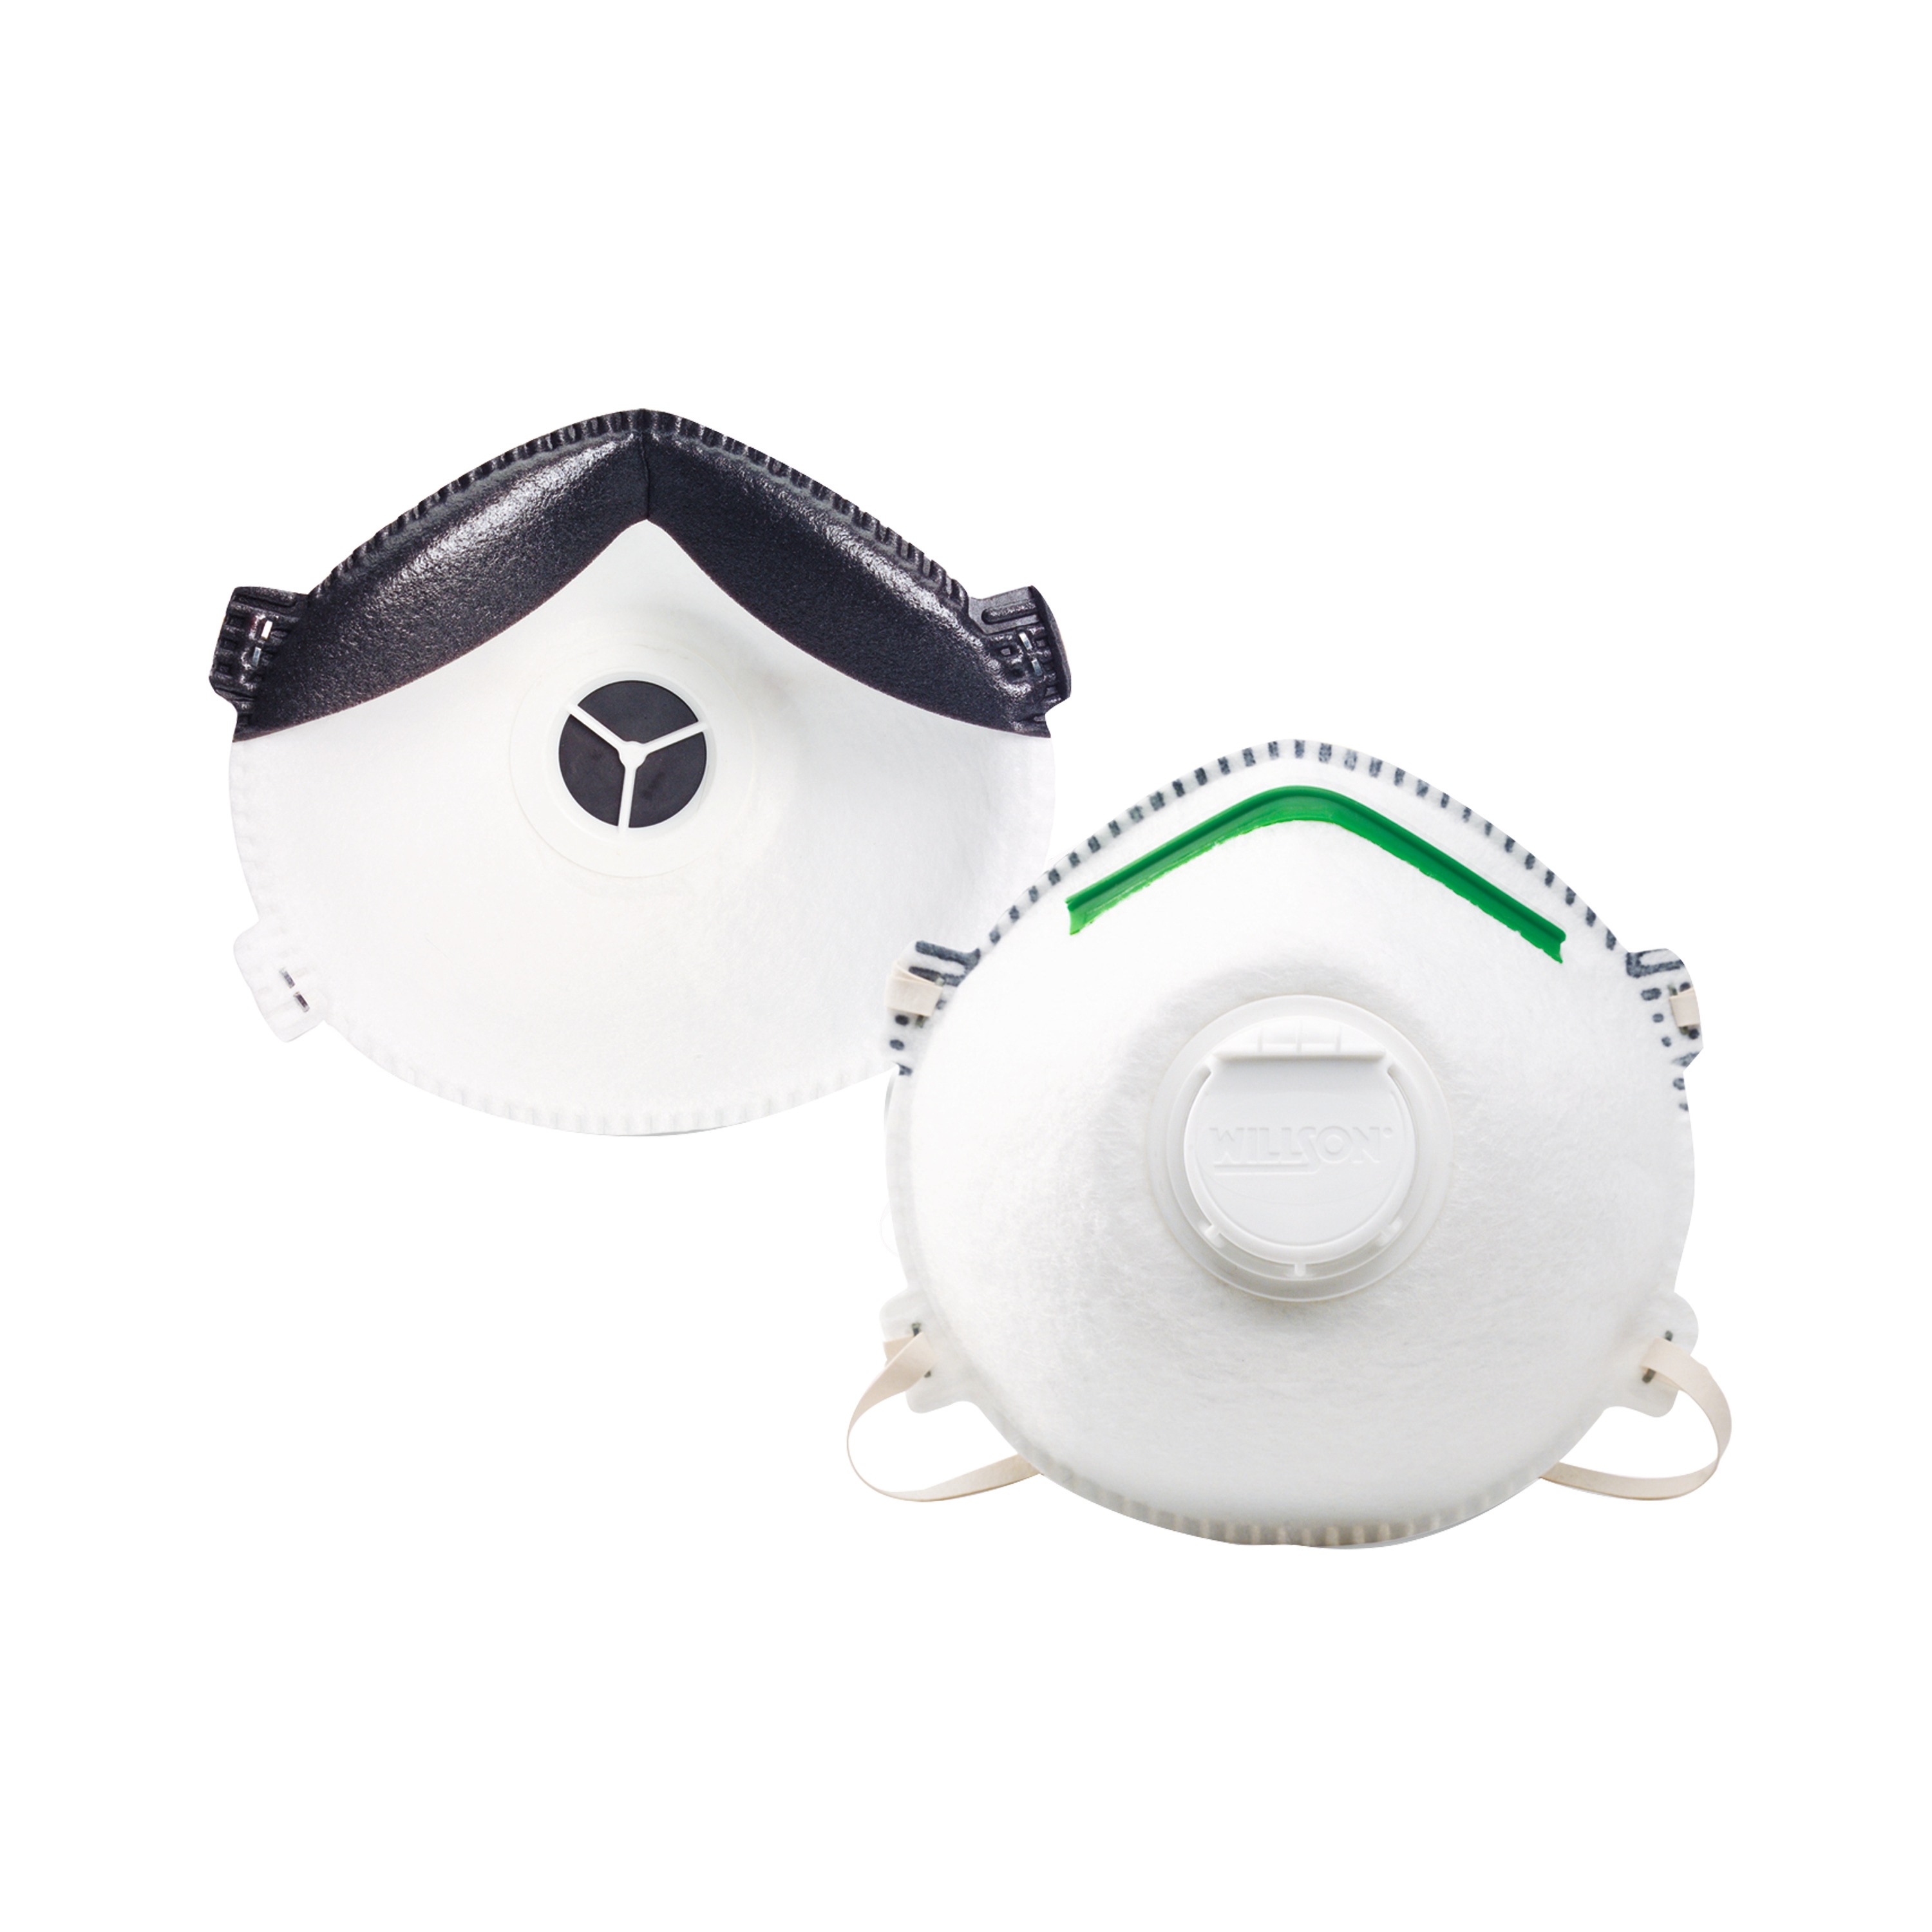 disposable dust mask with exhalation valve